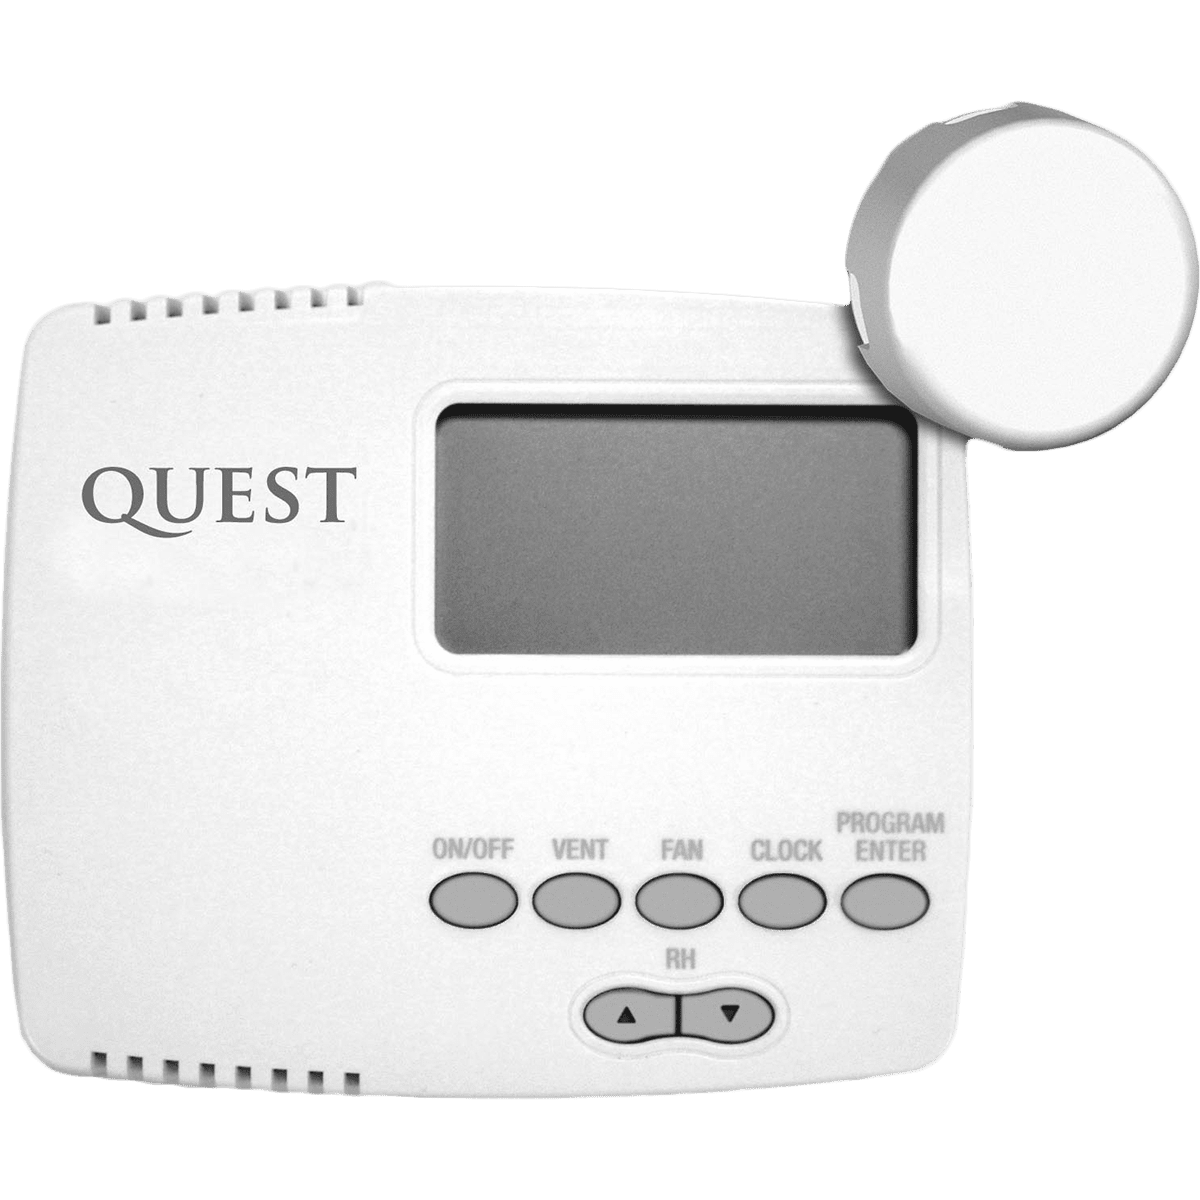 Quest DEH 3000R Digital Control with Sensor - Primary View